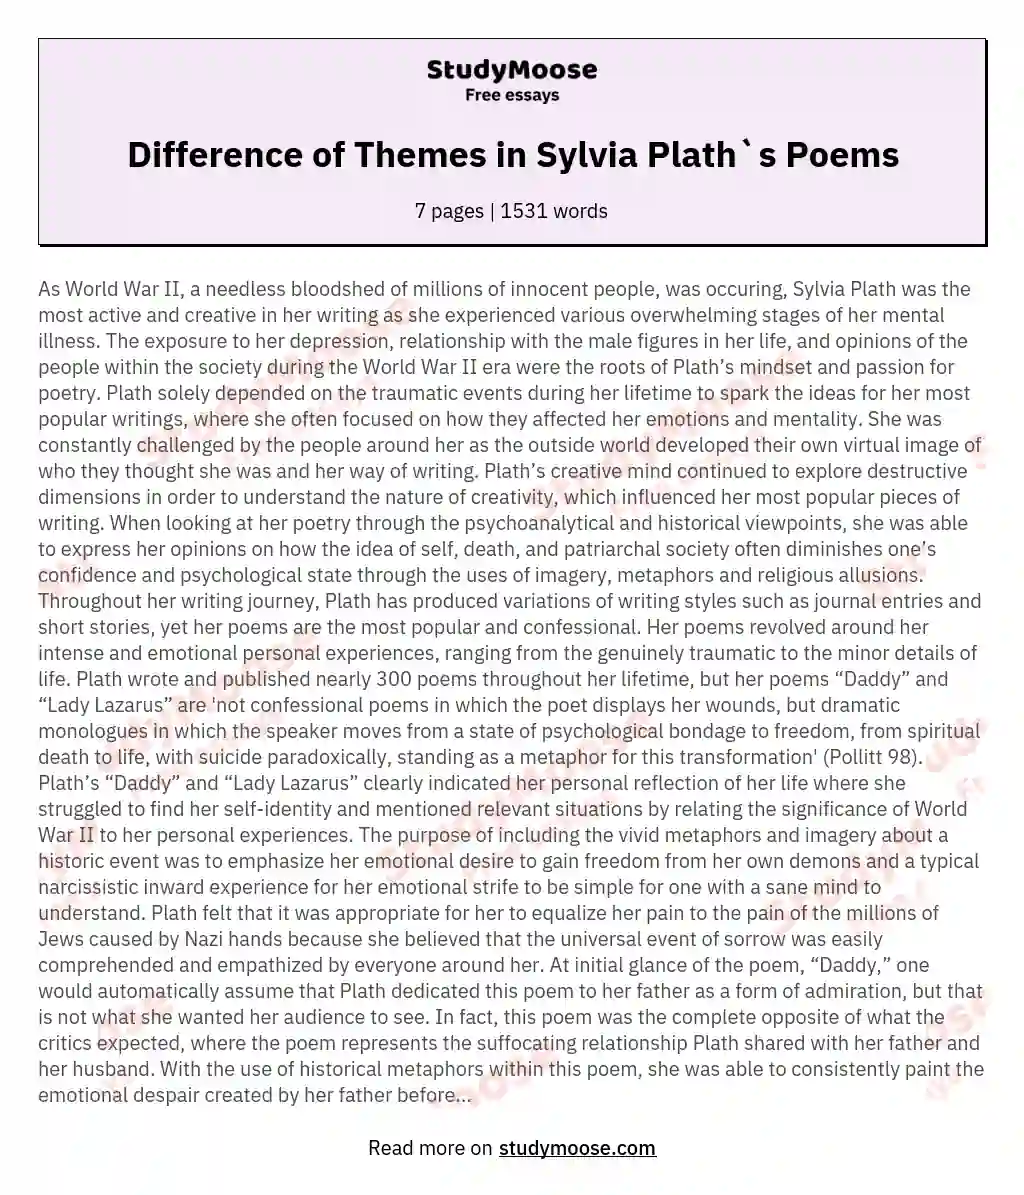 Difference of Themes in Sylvia Plath`s Poems essay